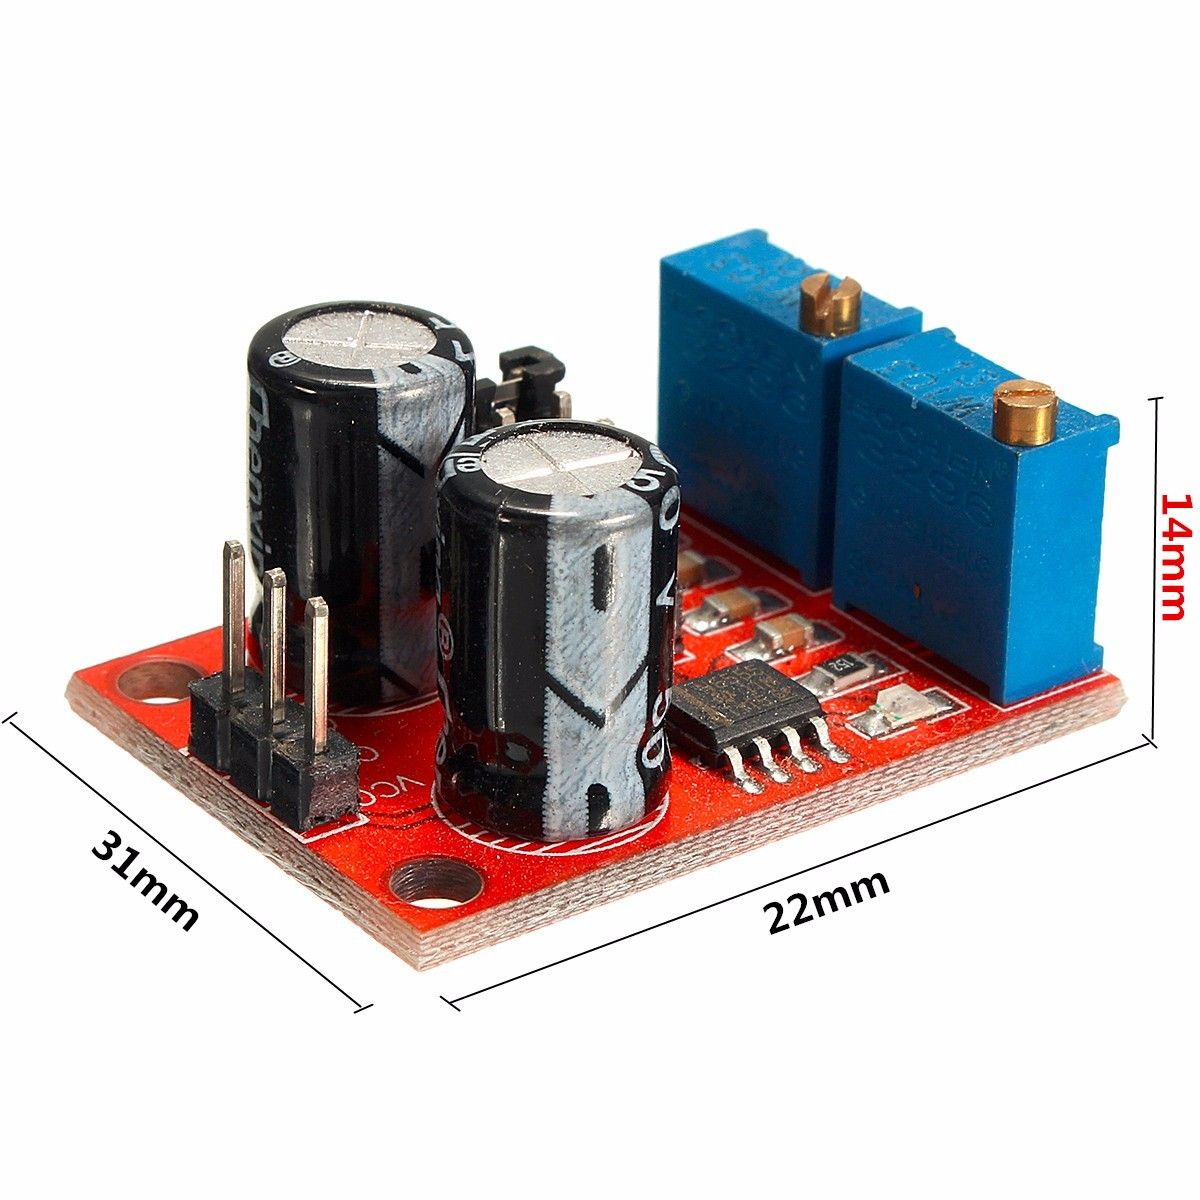 5Pcs-NE555-Pulse-Frequency-Duty-Cycle-Adjustable-Module-Square-Wave-Signal-Generator-1067375